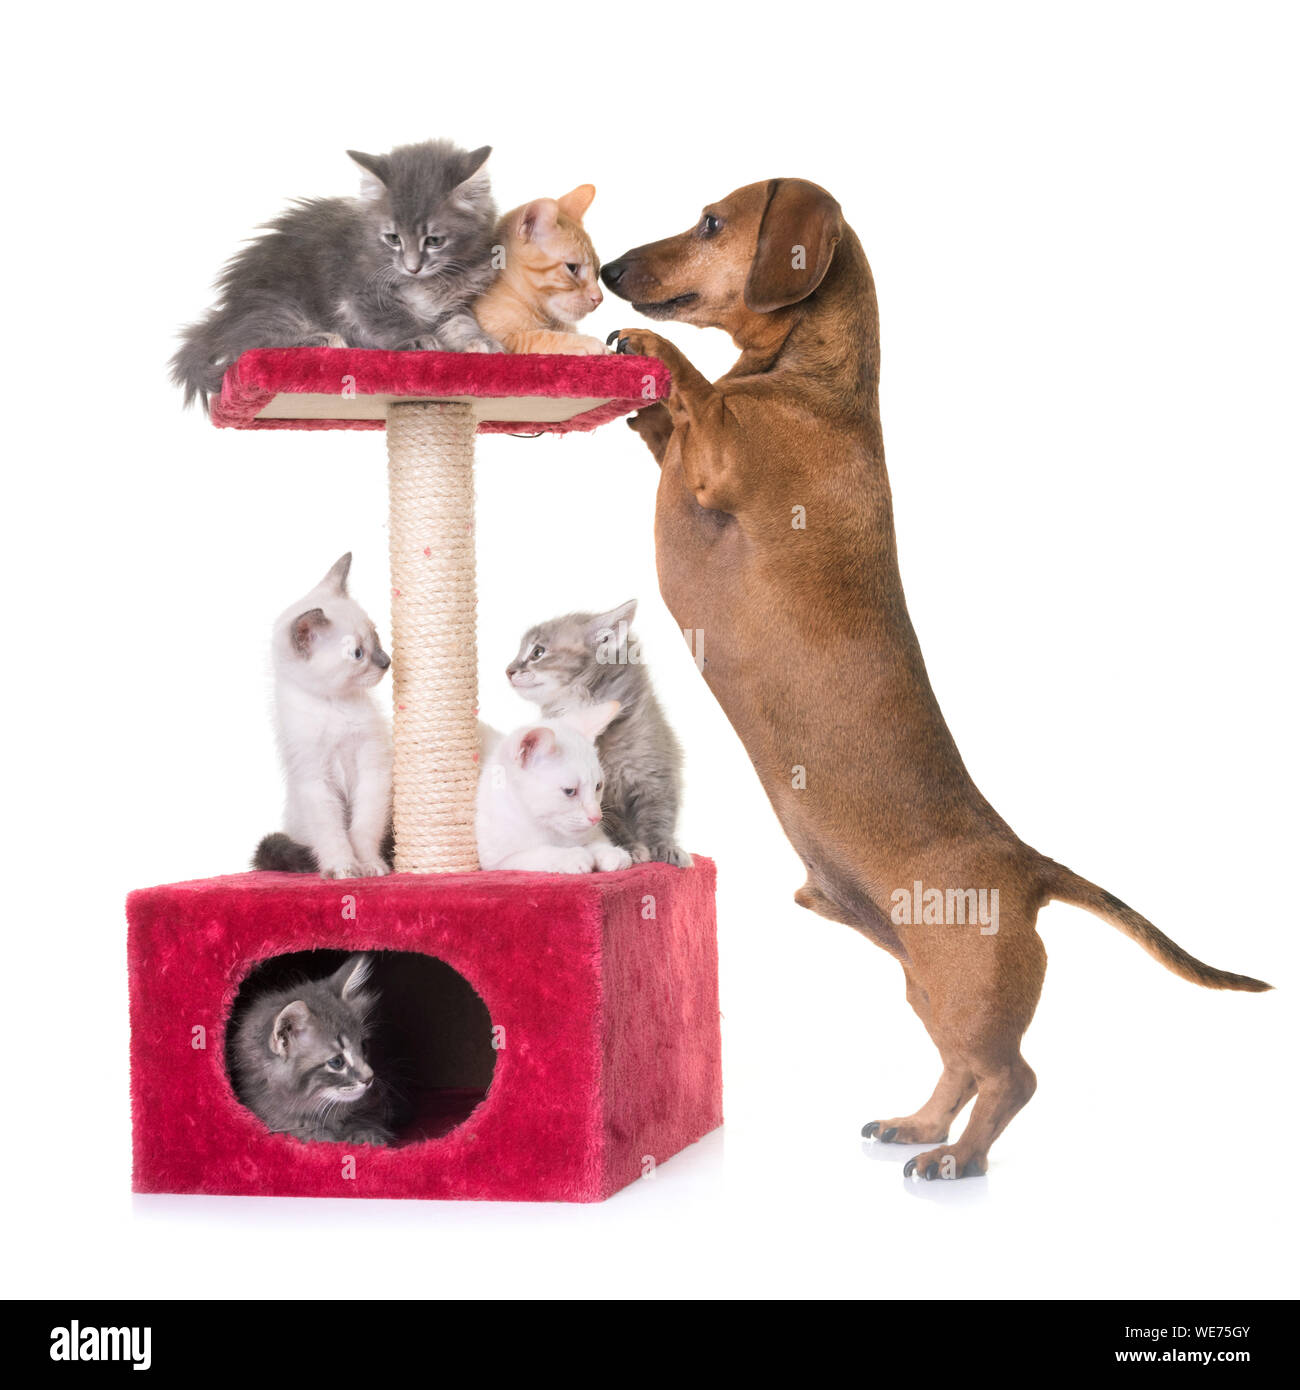 Dog Rearing Up On Pink Structure With Kittens Against White Background Stock Photo